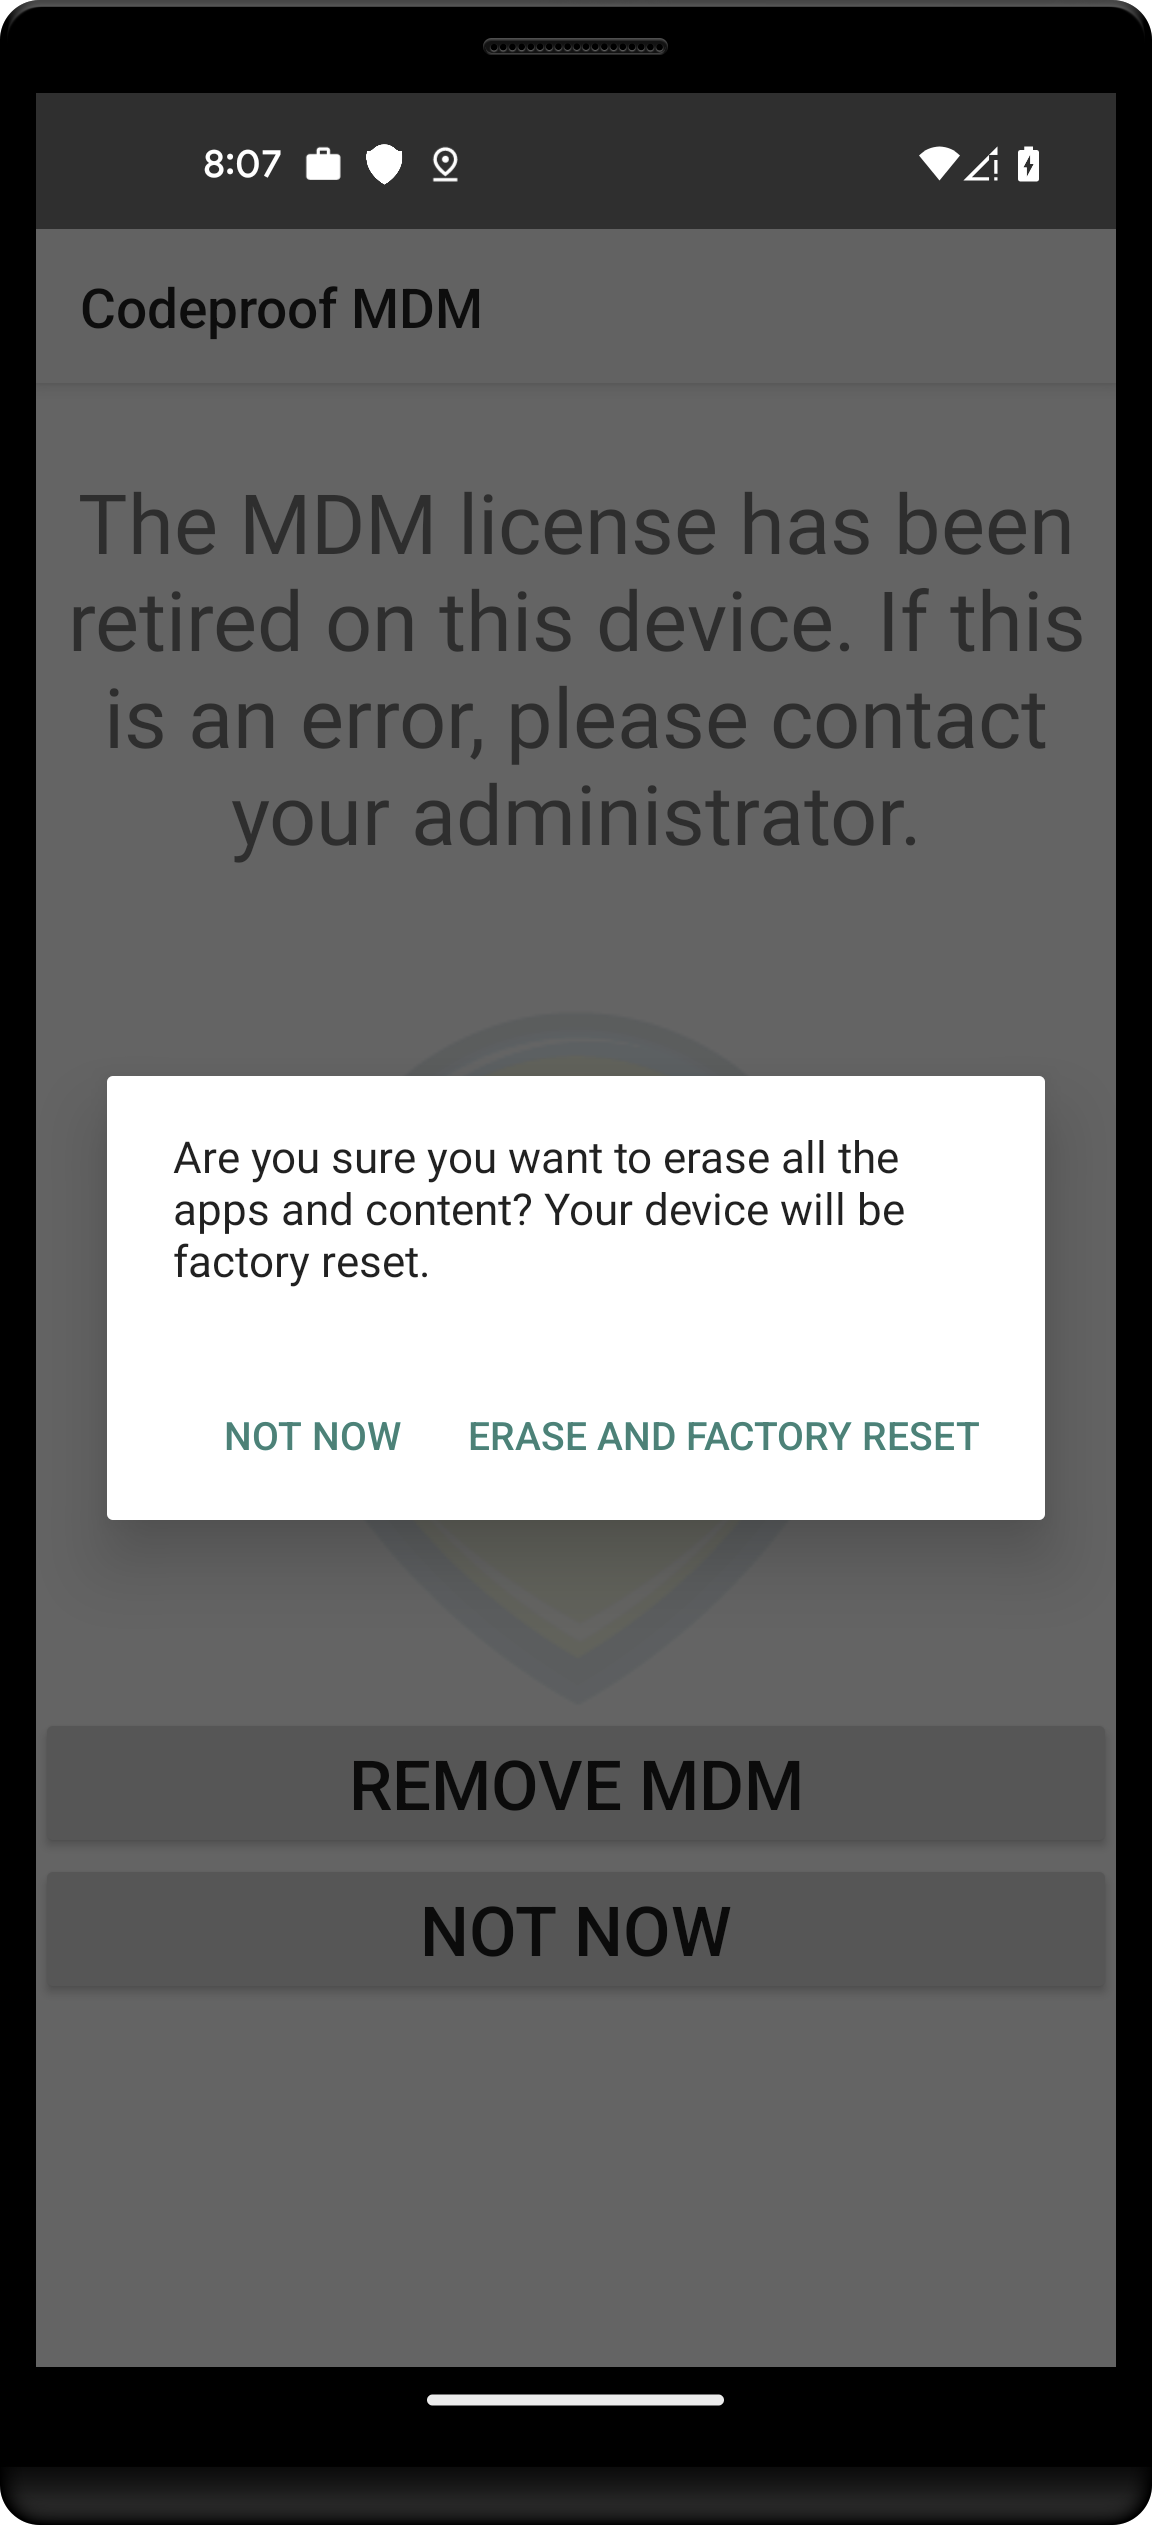 Codeproof Android MDM license retire device erase Prompt